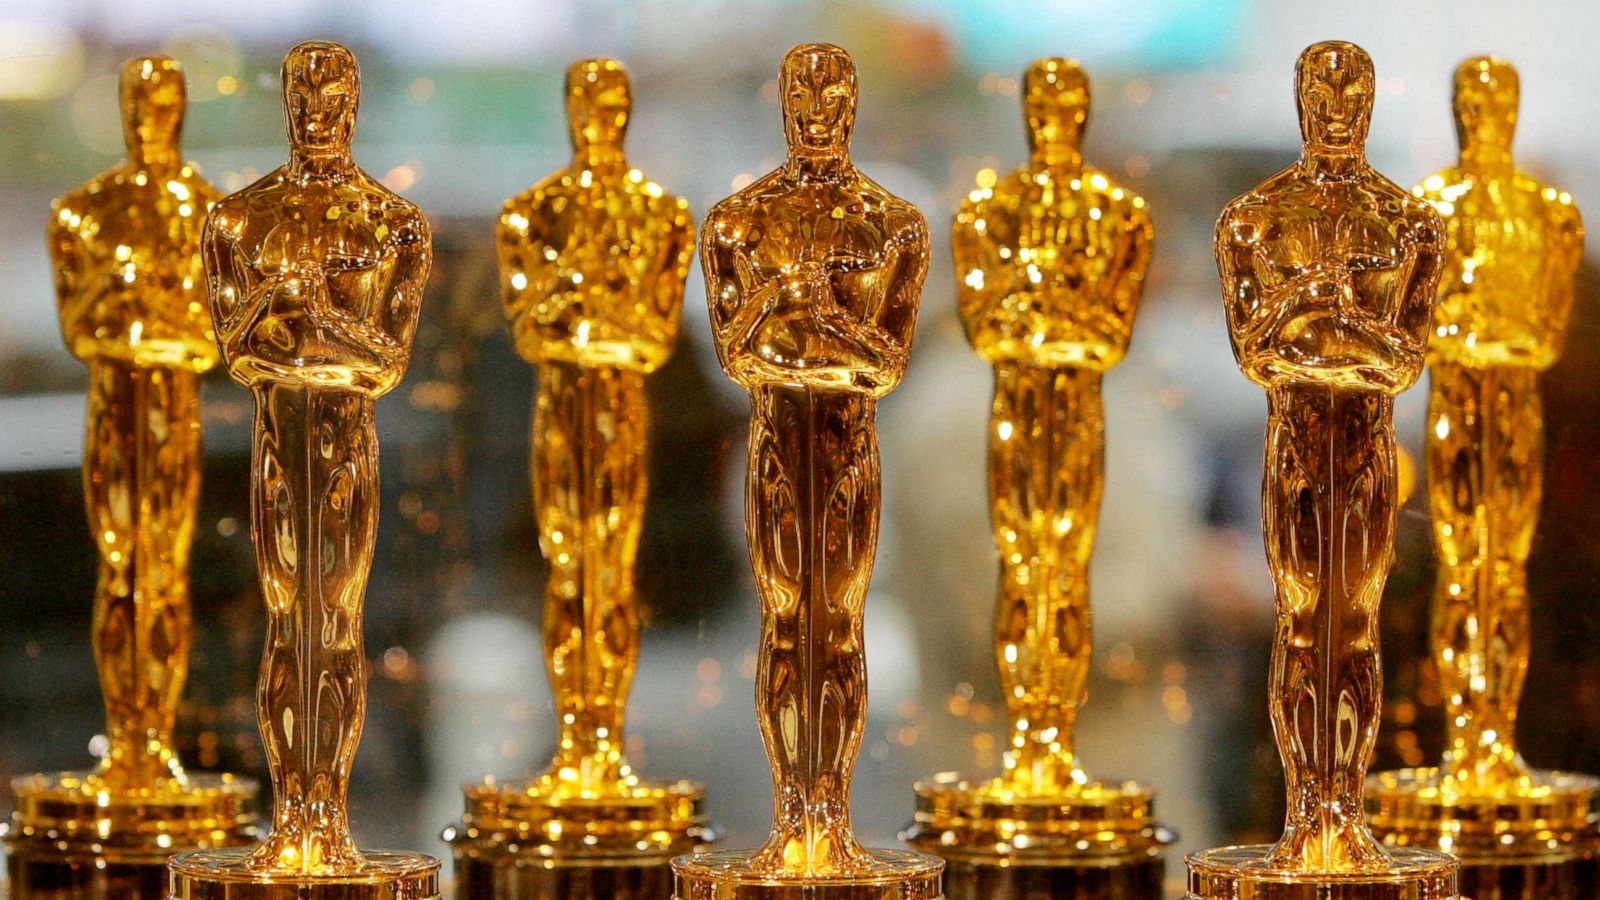 Oscars 2021: Academy moves back ceremony from February 28 to April